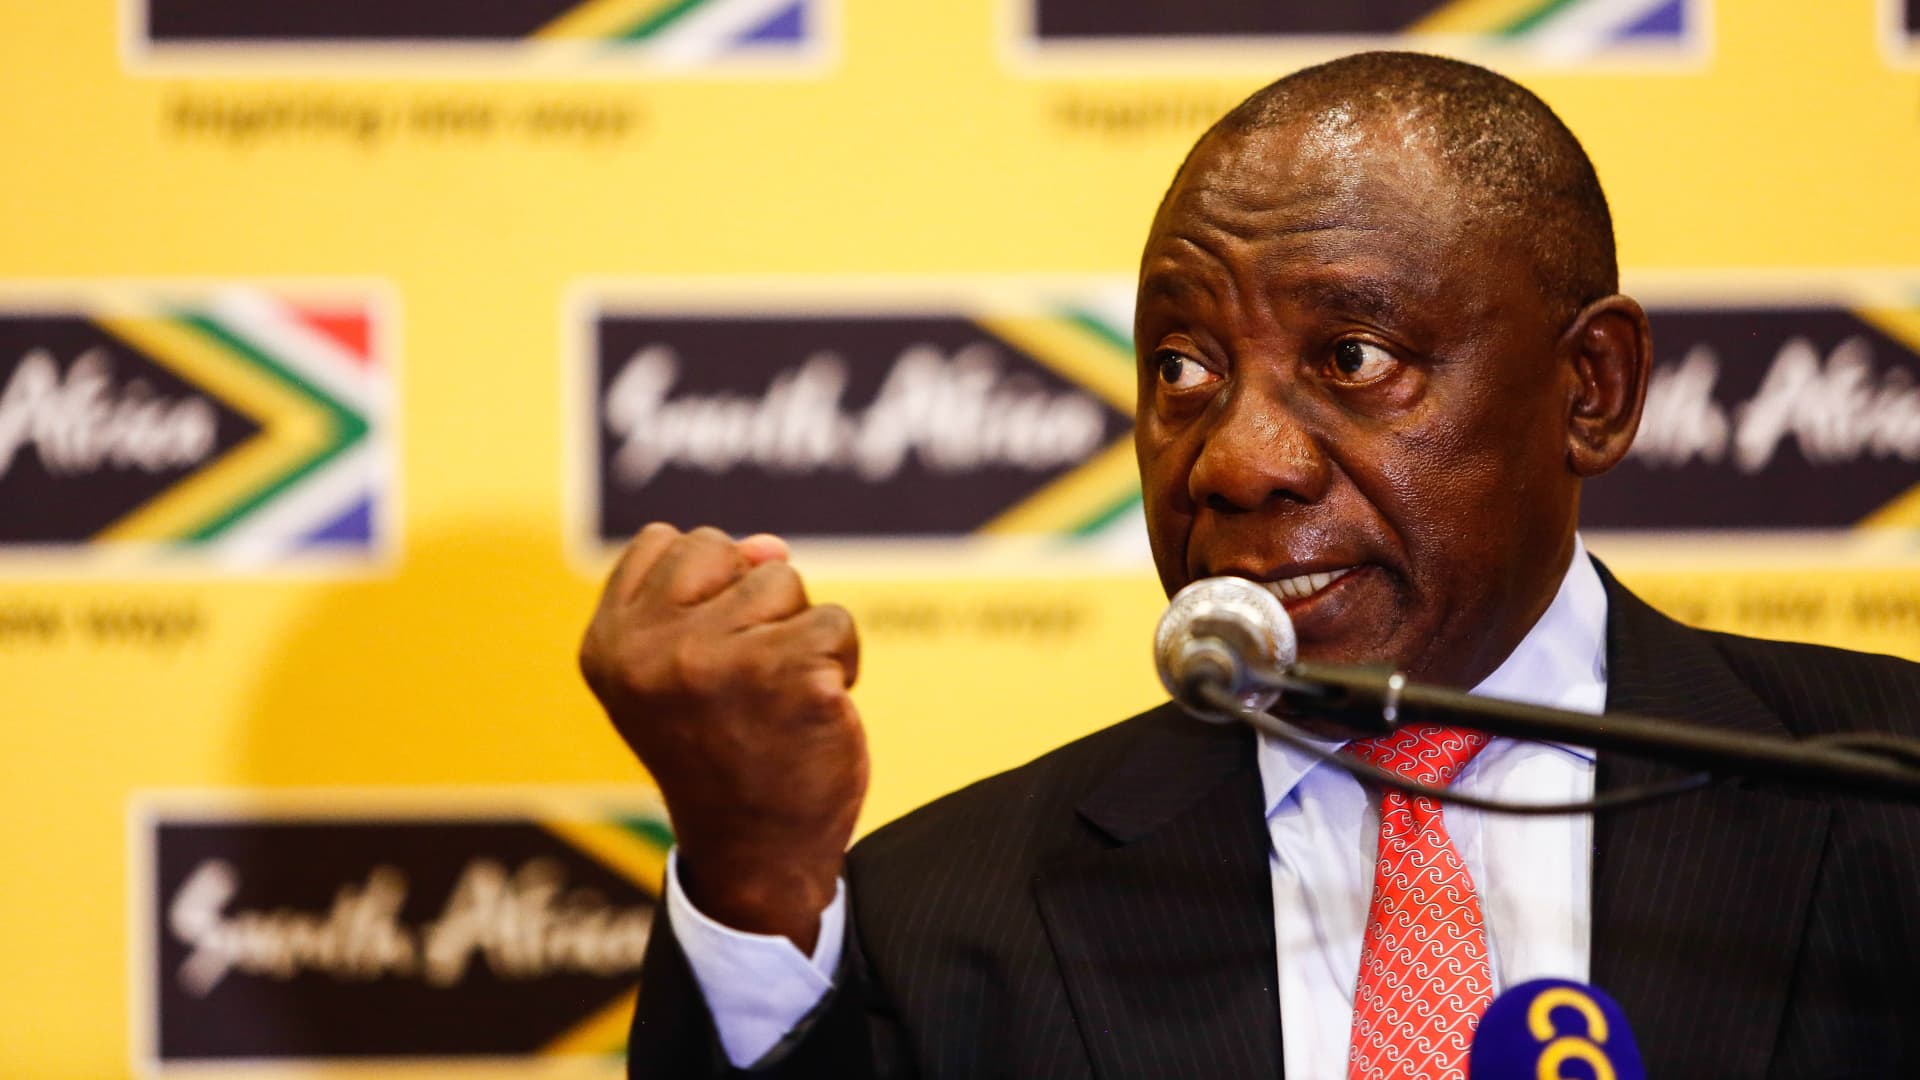 South Africa President Ramaphosa faces threat of impeachment over ‘Farmgate’ scandal